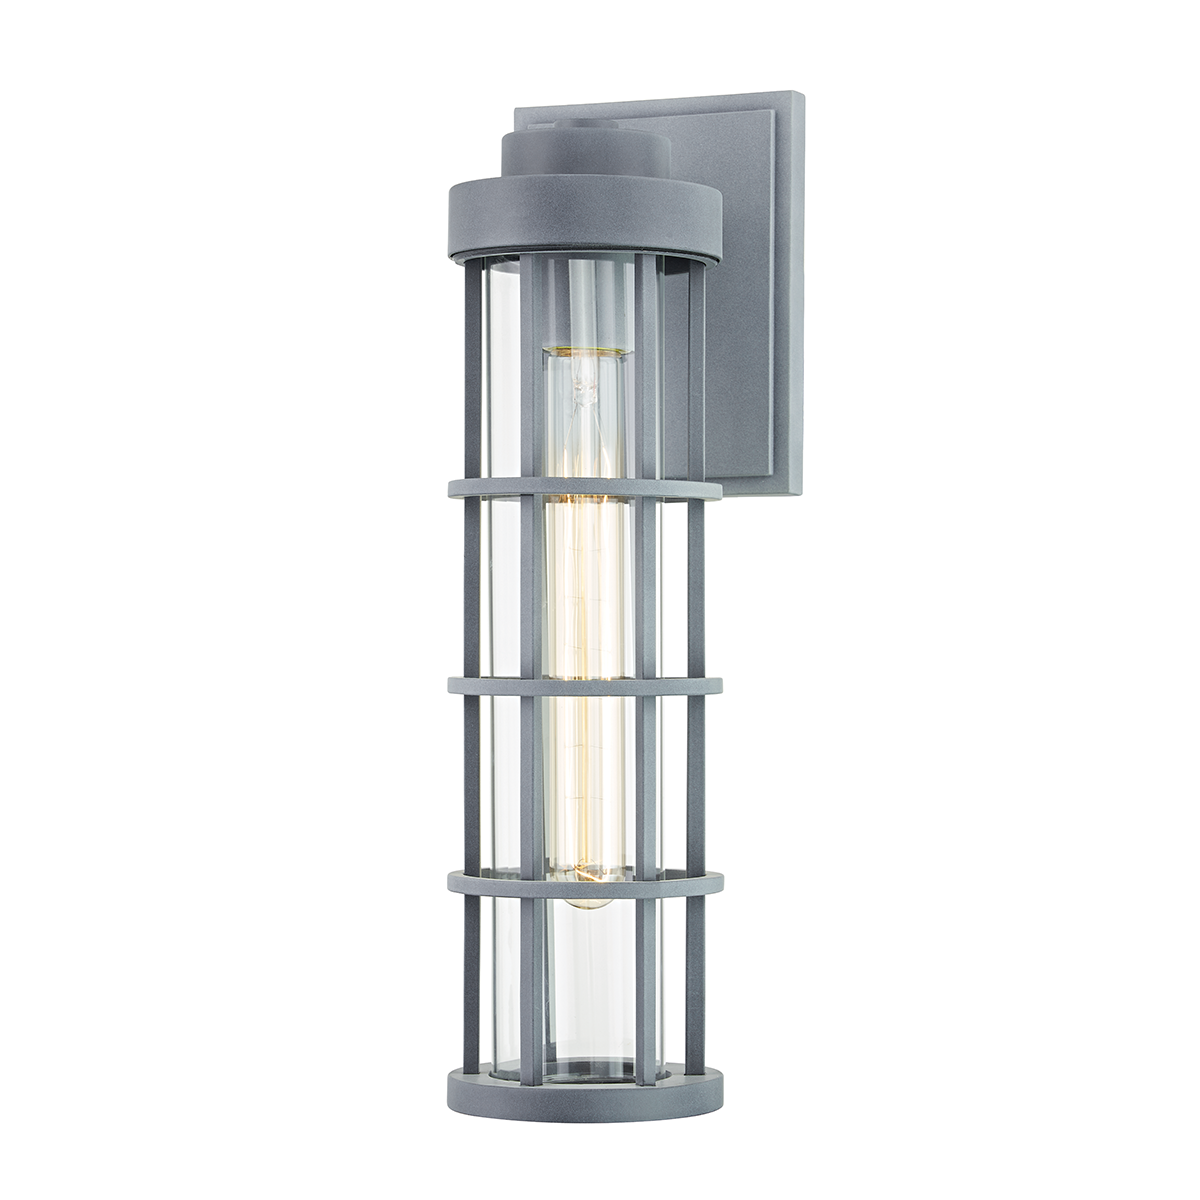 Troy Lighting 1 LIGHT LARGE EXTERIOR WALL SCONCE B2042